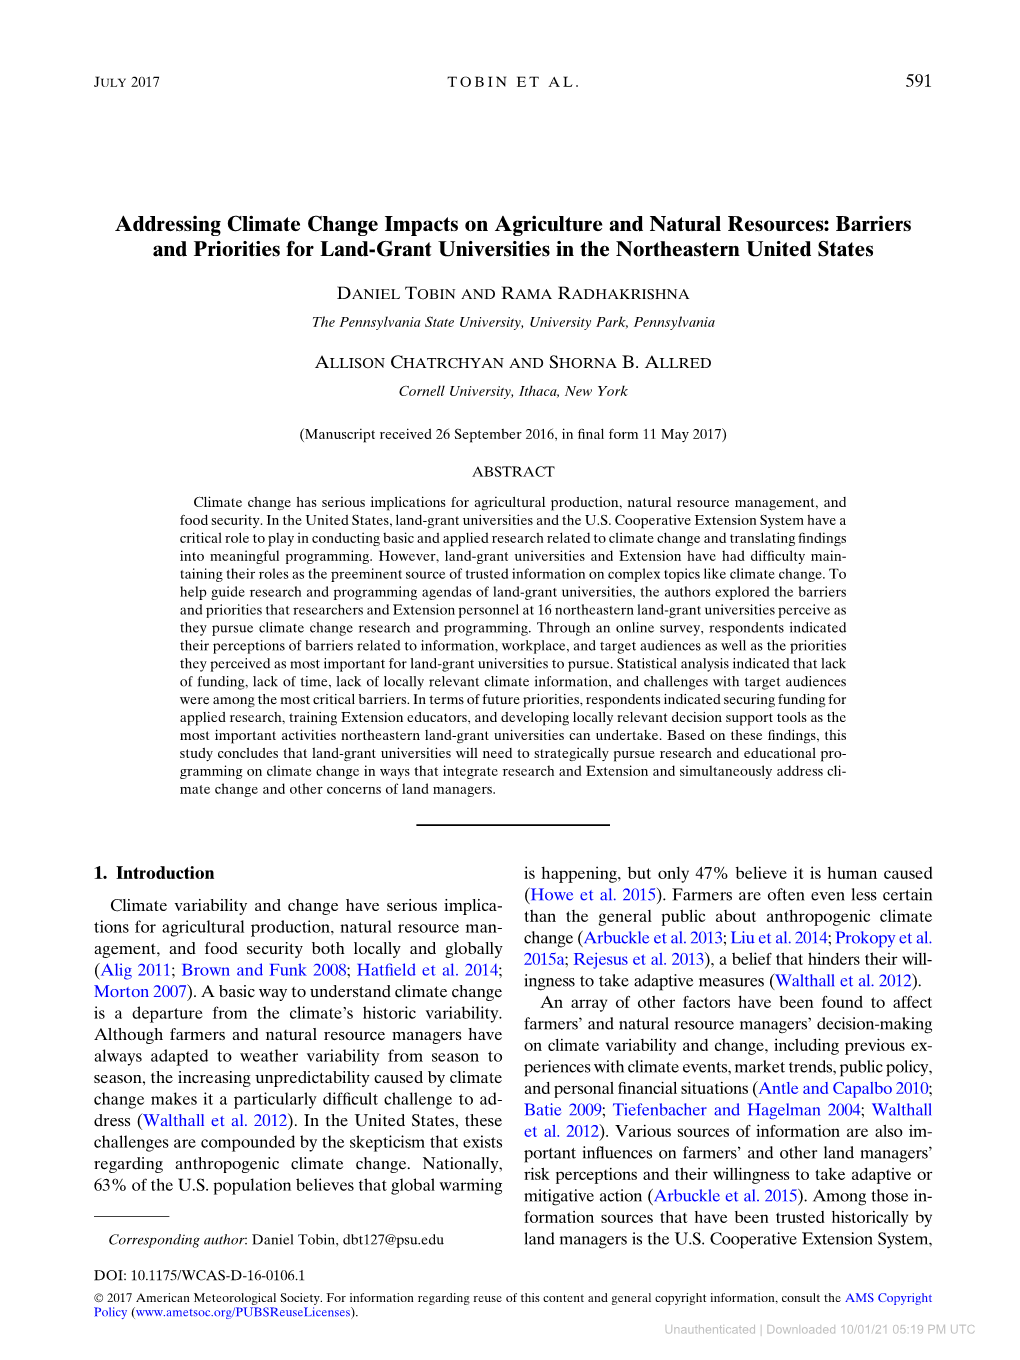 Addressing Climate Change Impacts on Agriculture and Natural Resources: Barriers and Priorities for Land-Grant Universities in the Northeastern United States